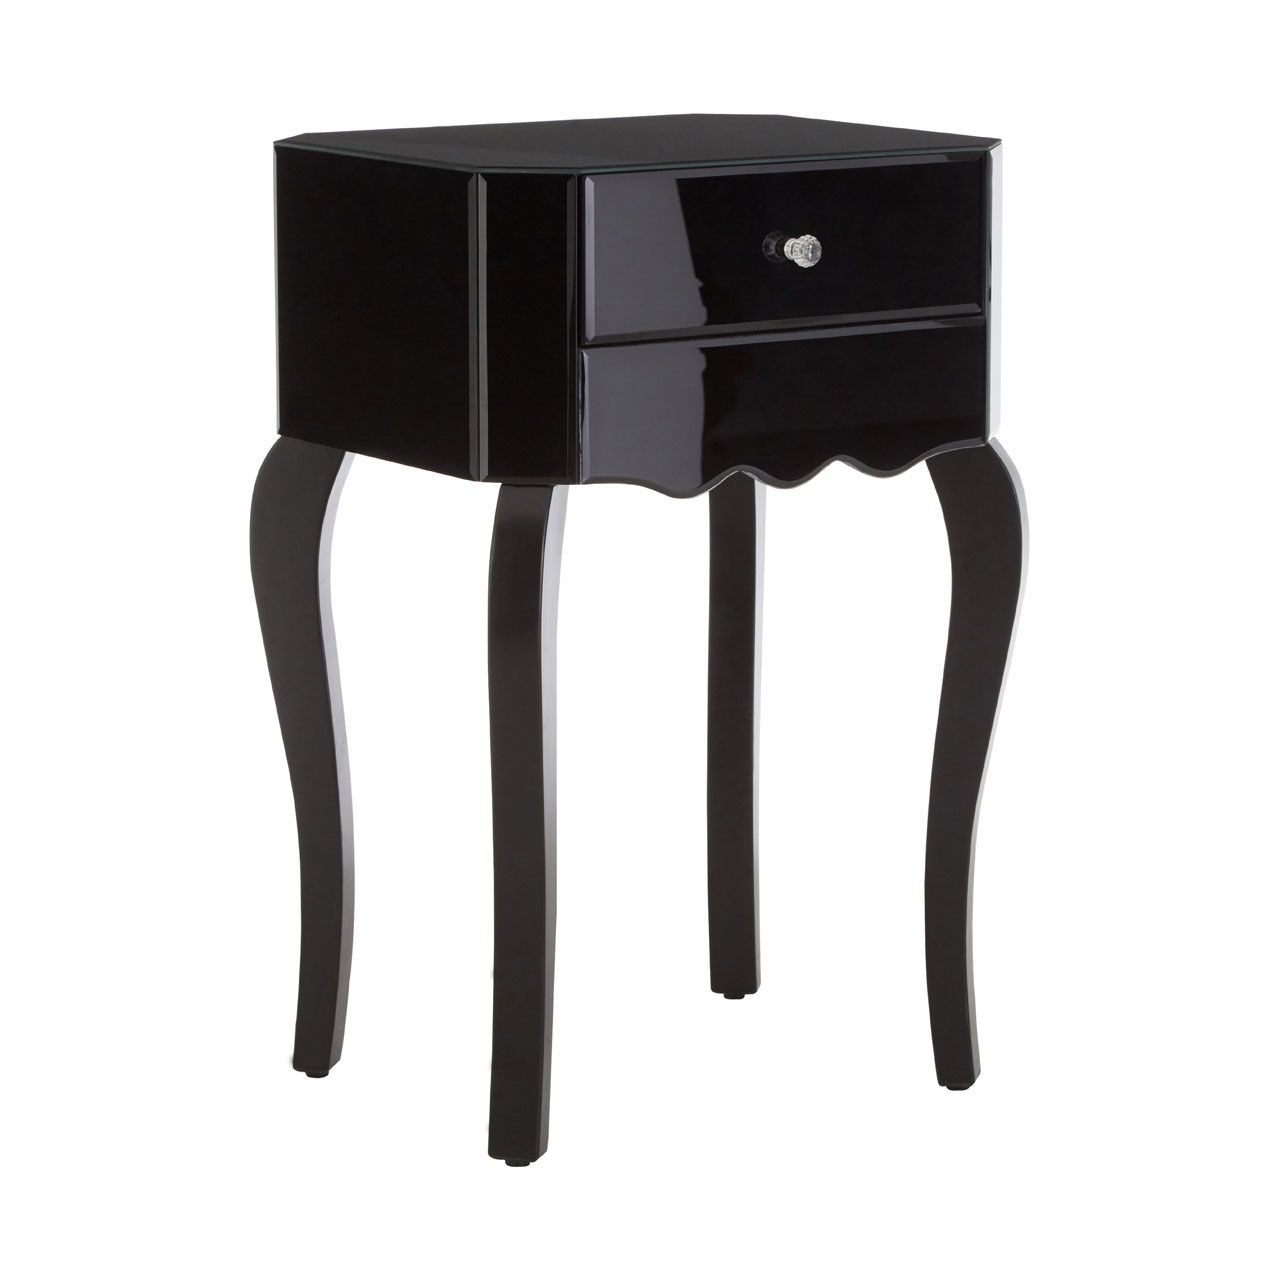 Orchid Mirrored Side Table In Black High Gloss With 1 Drawer